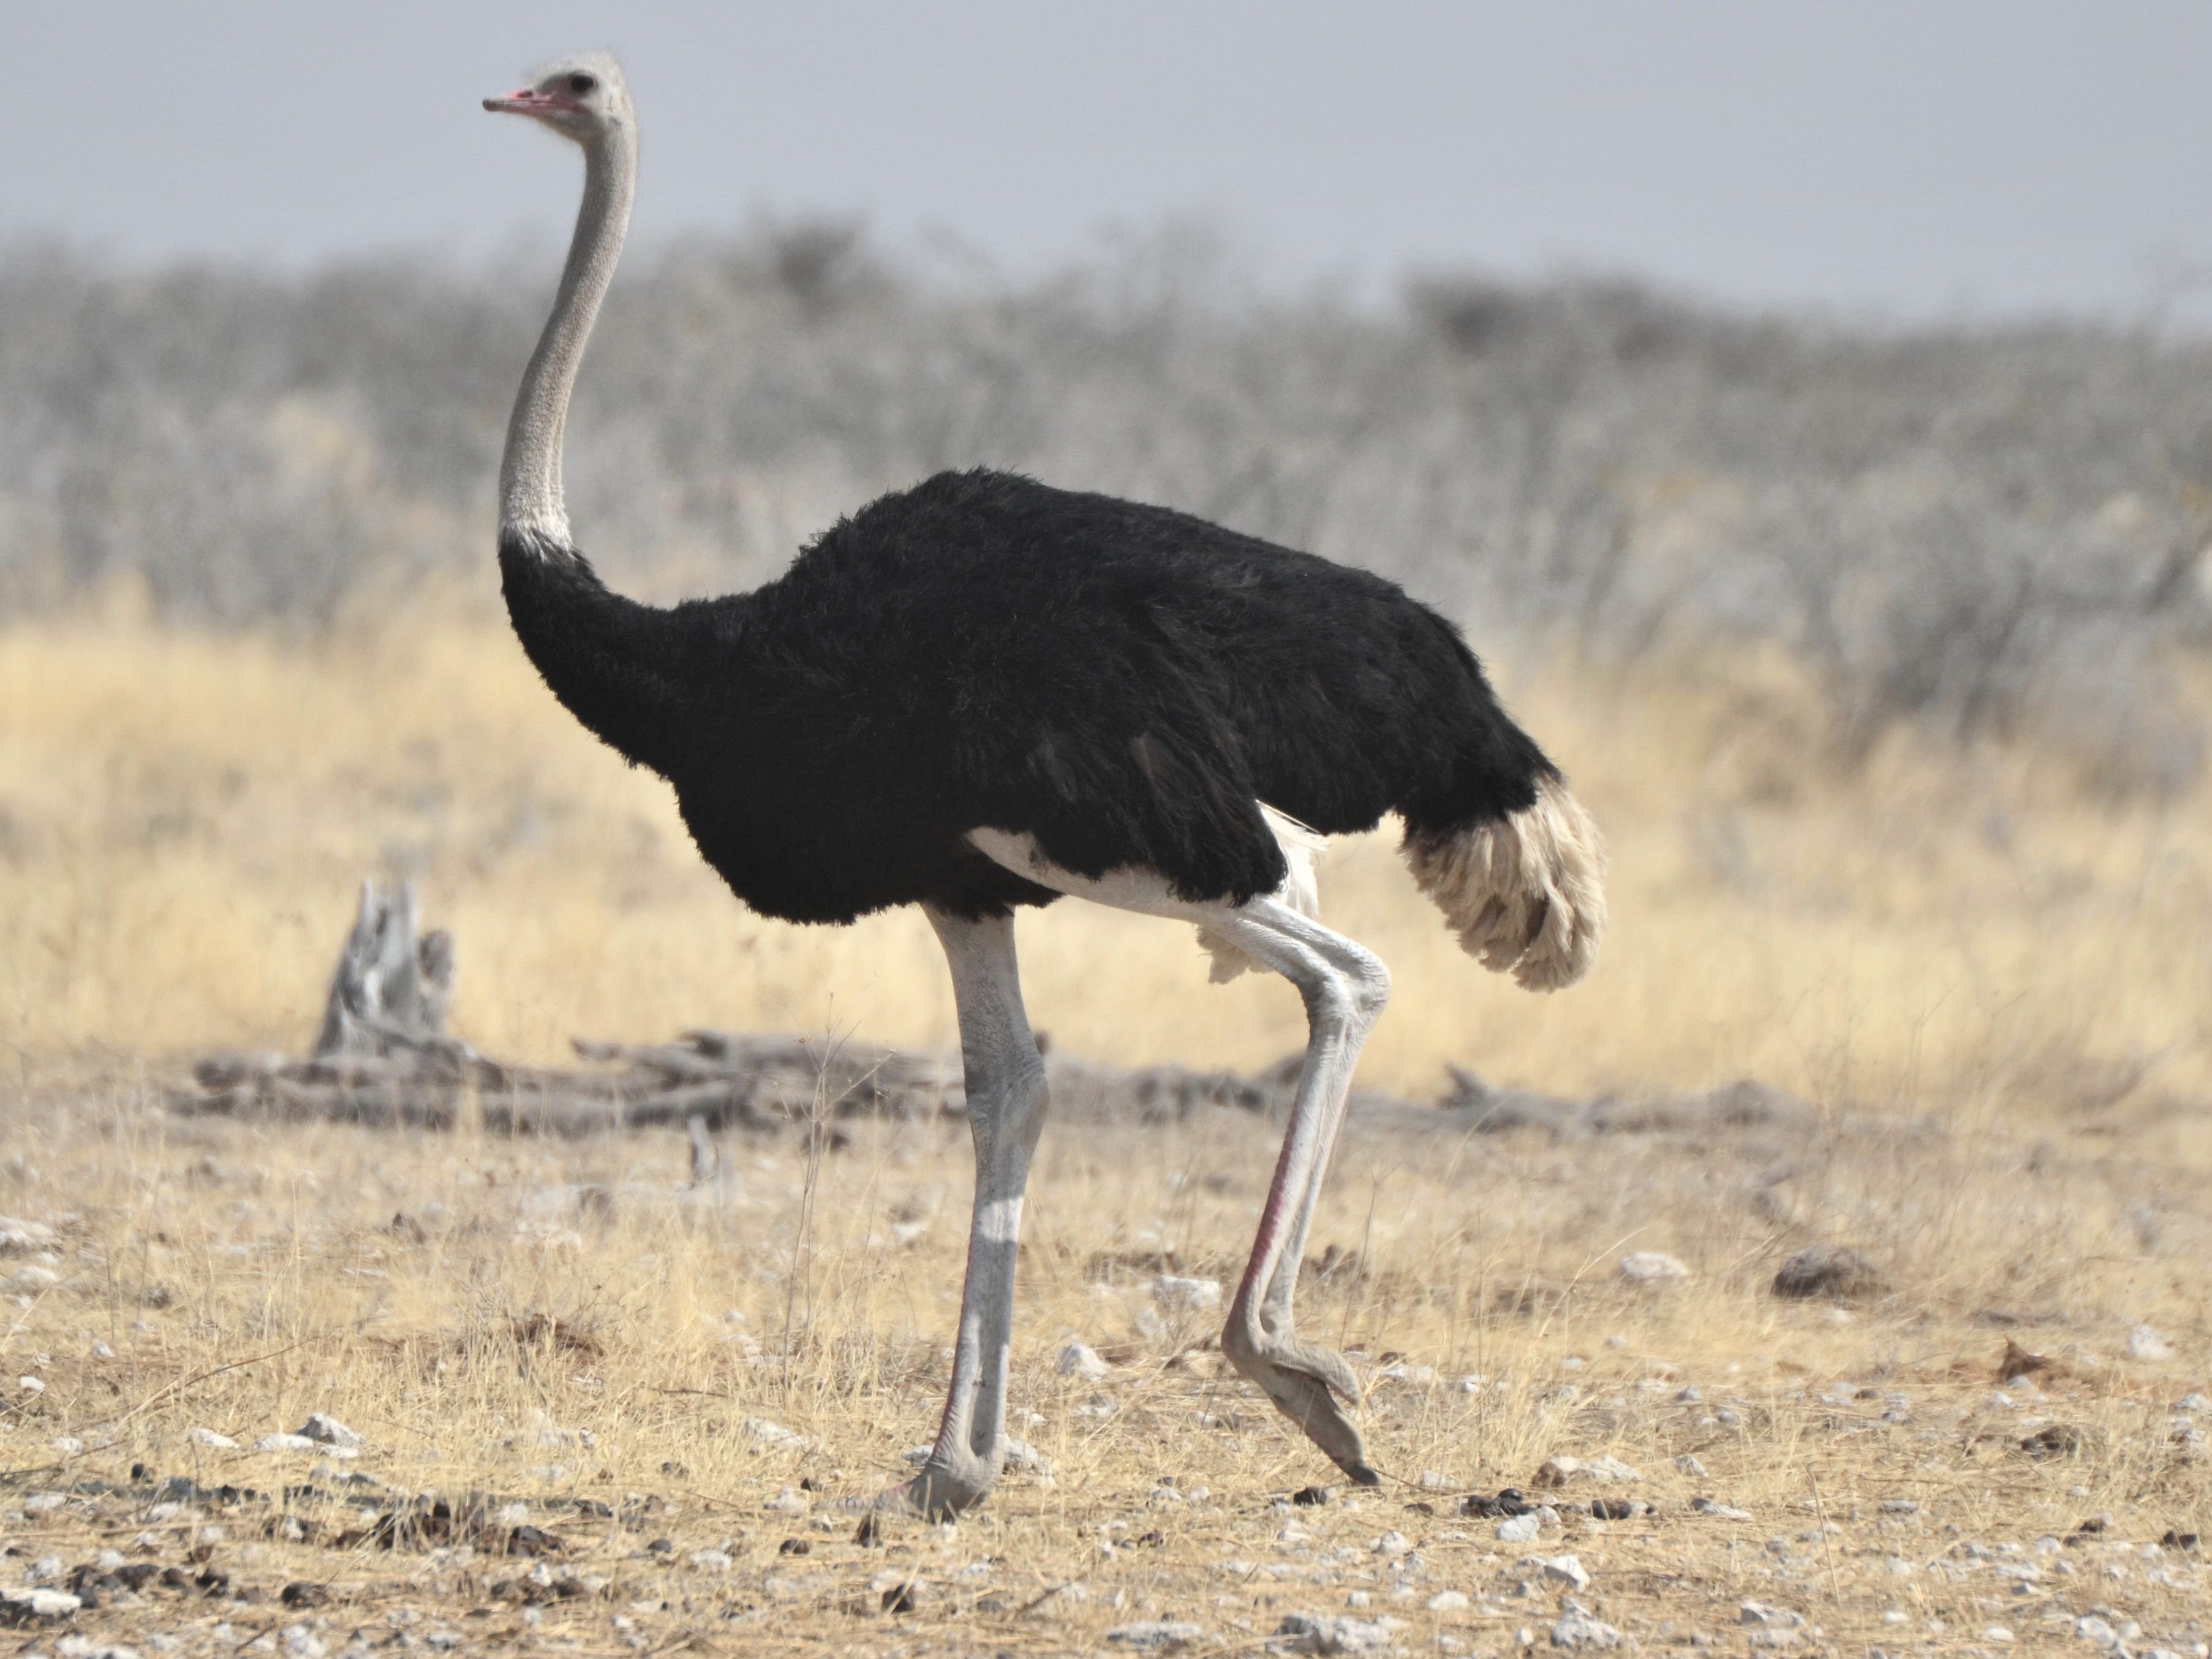 Click picture to see more Ostriches.